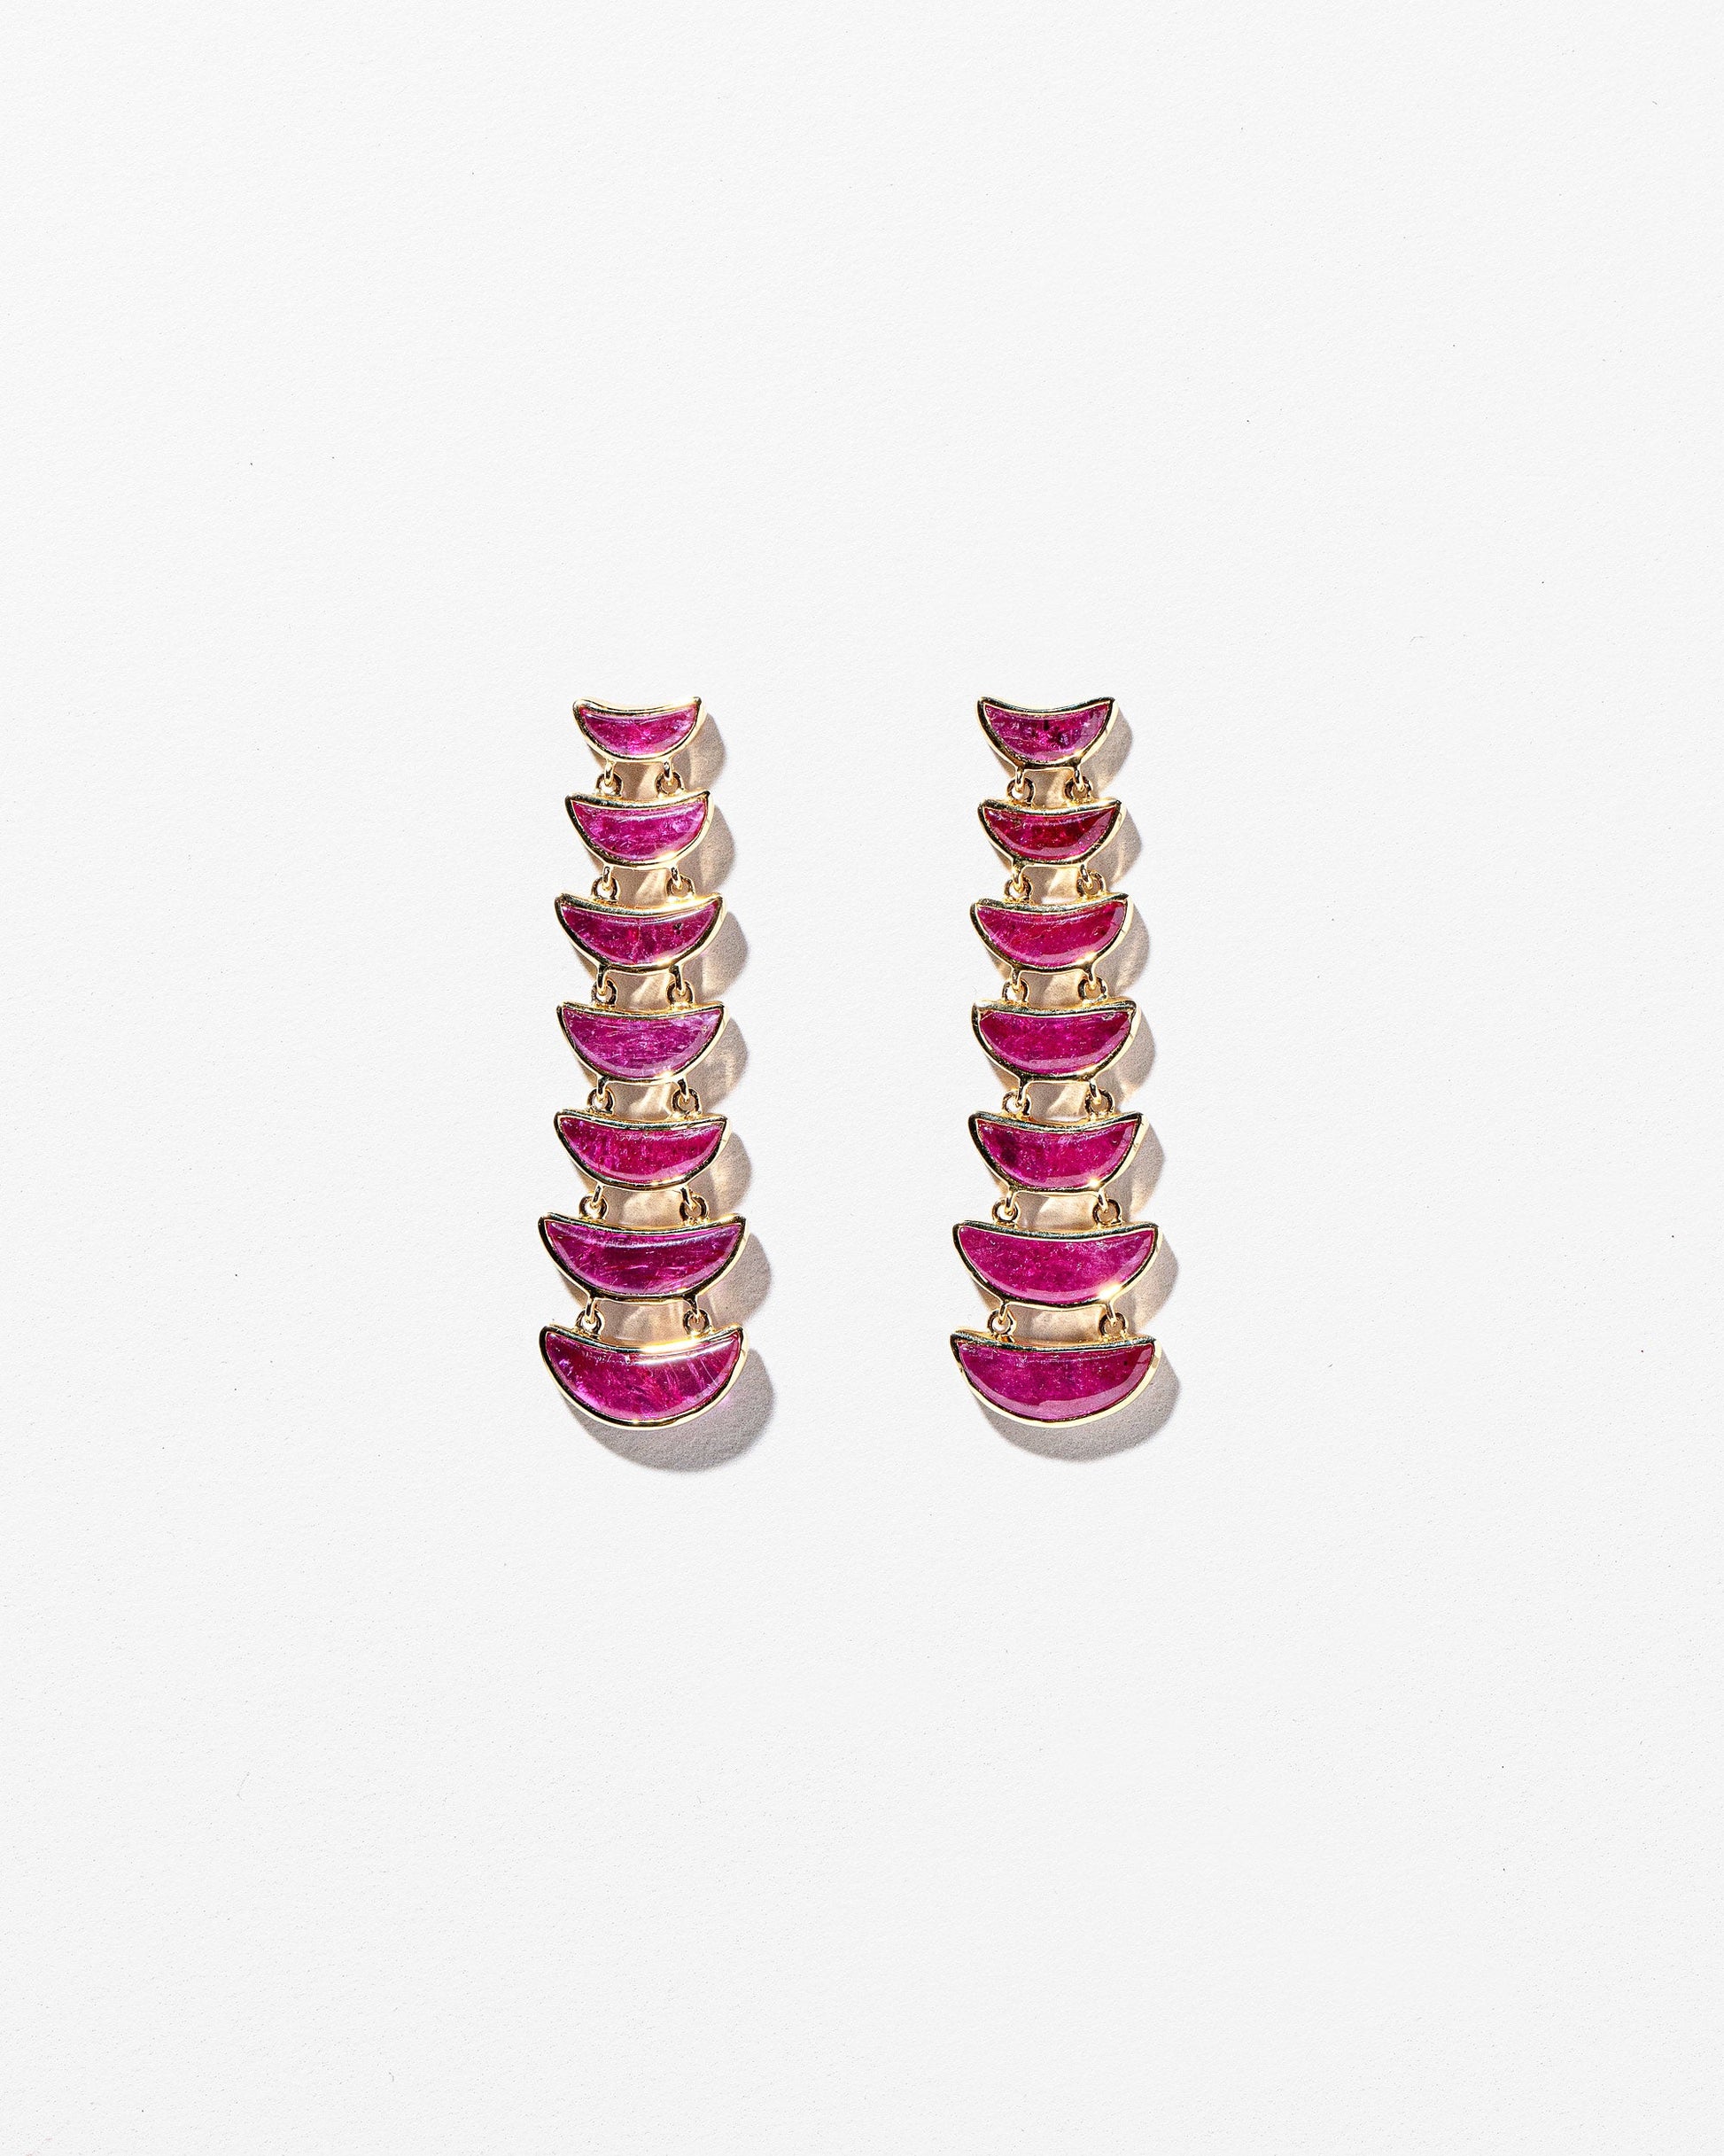  Flame Earrings on light color background.